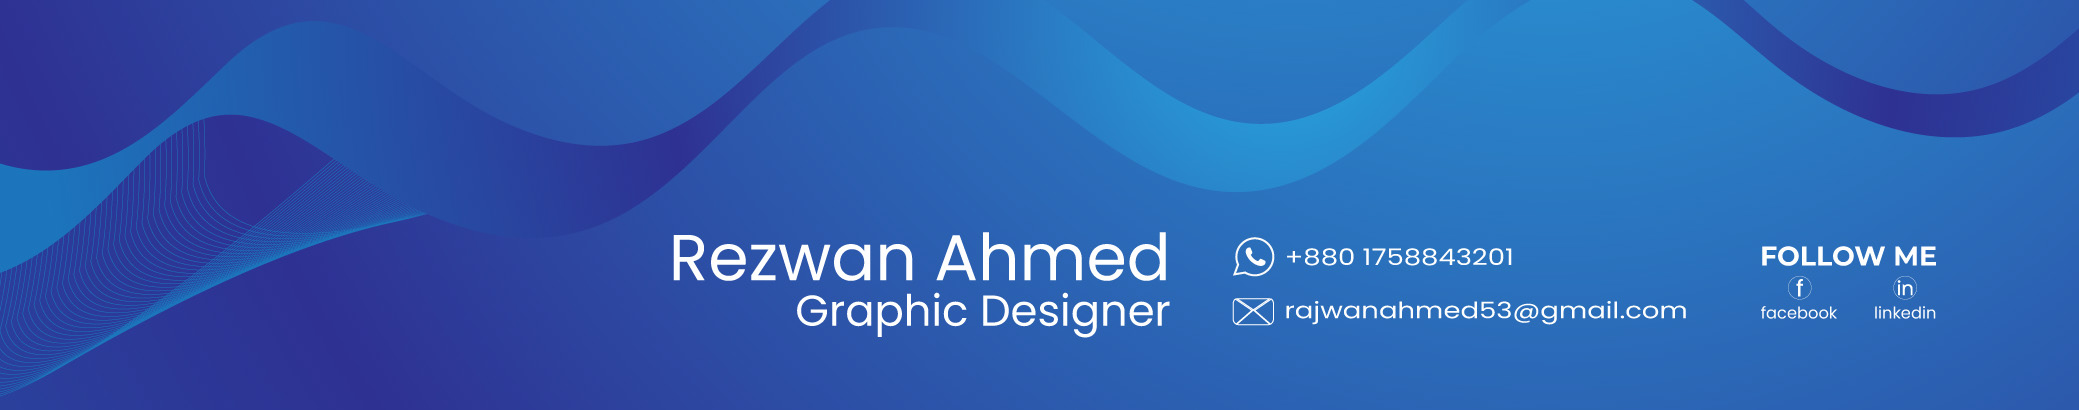 Rezwan Ahmed's profile banner